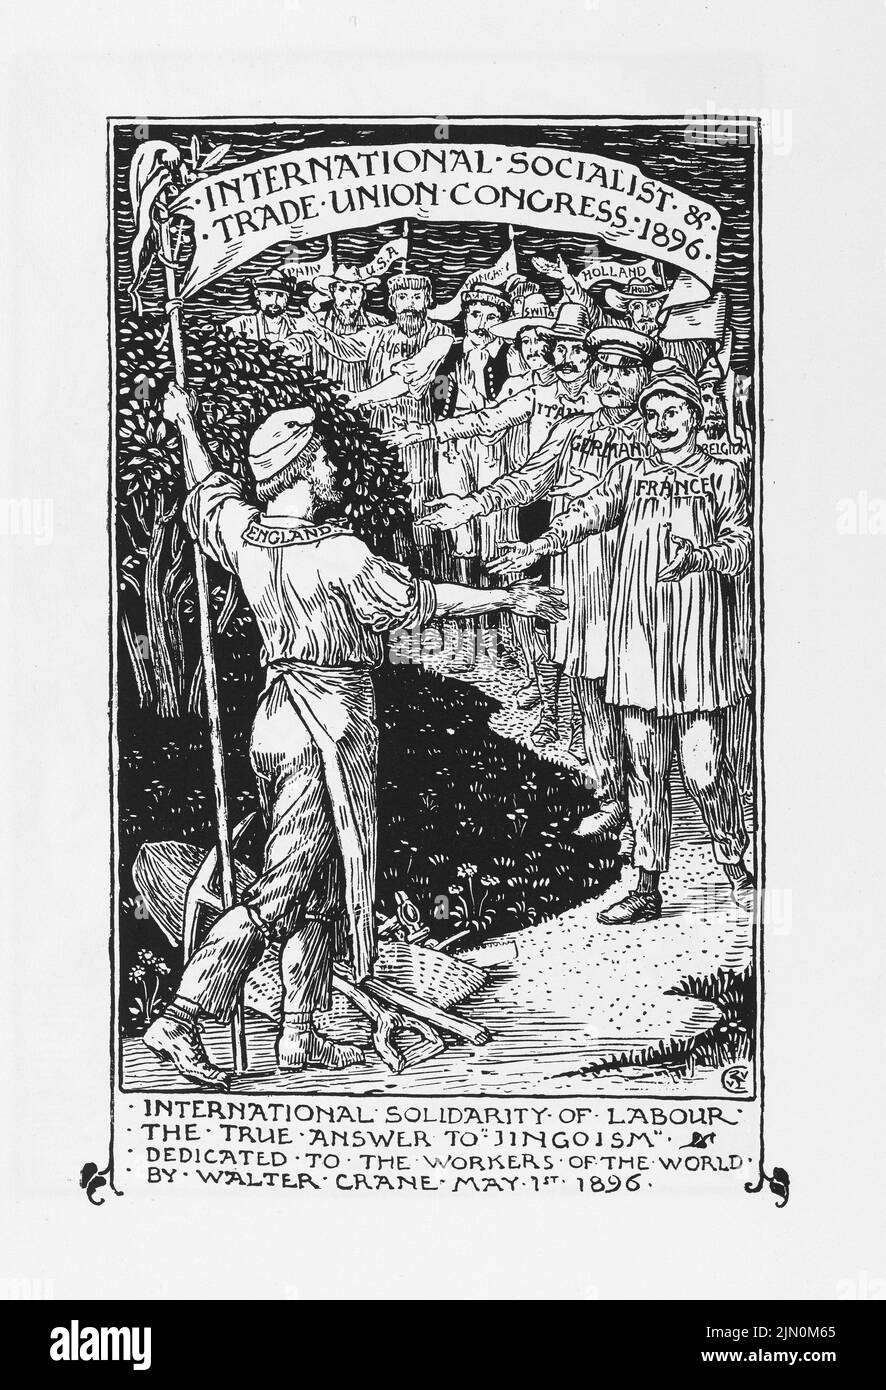 Illustration by Walter Crane from Cartoons for the Cause 1886-1896, International Socialist Workers. Stock Photo